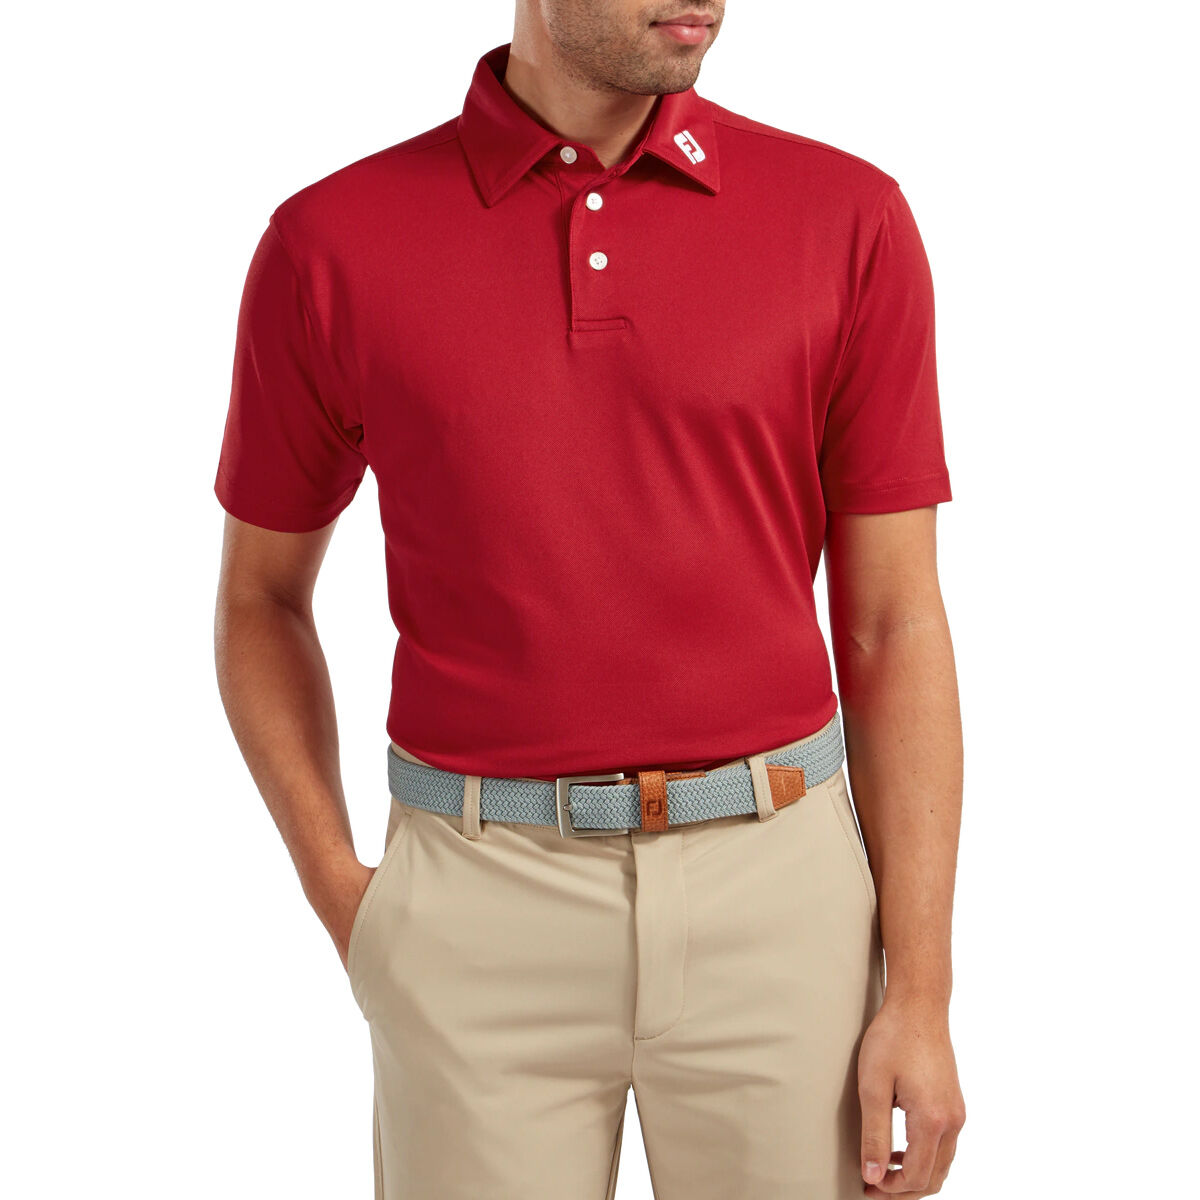 FootJoy Men's Stretch Pique Solid Colour Golf Polo Shirt, Mens, Red, Small | American Golf von FootJoy